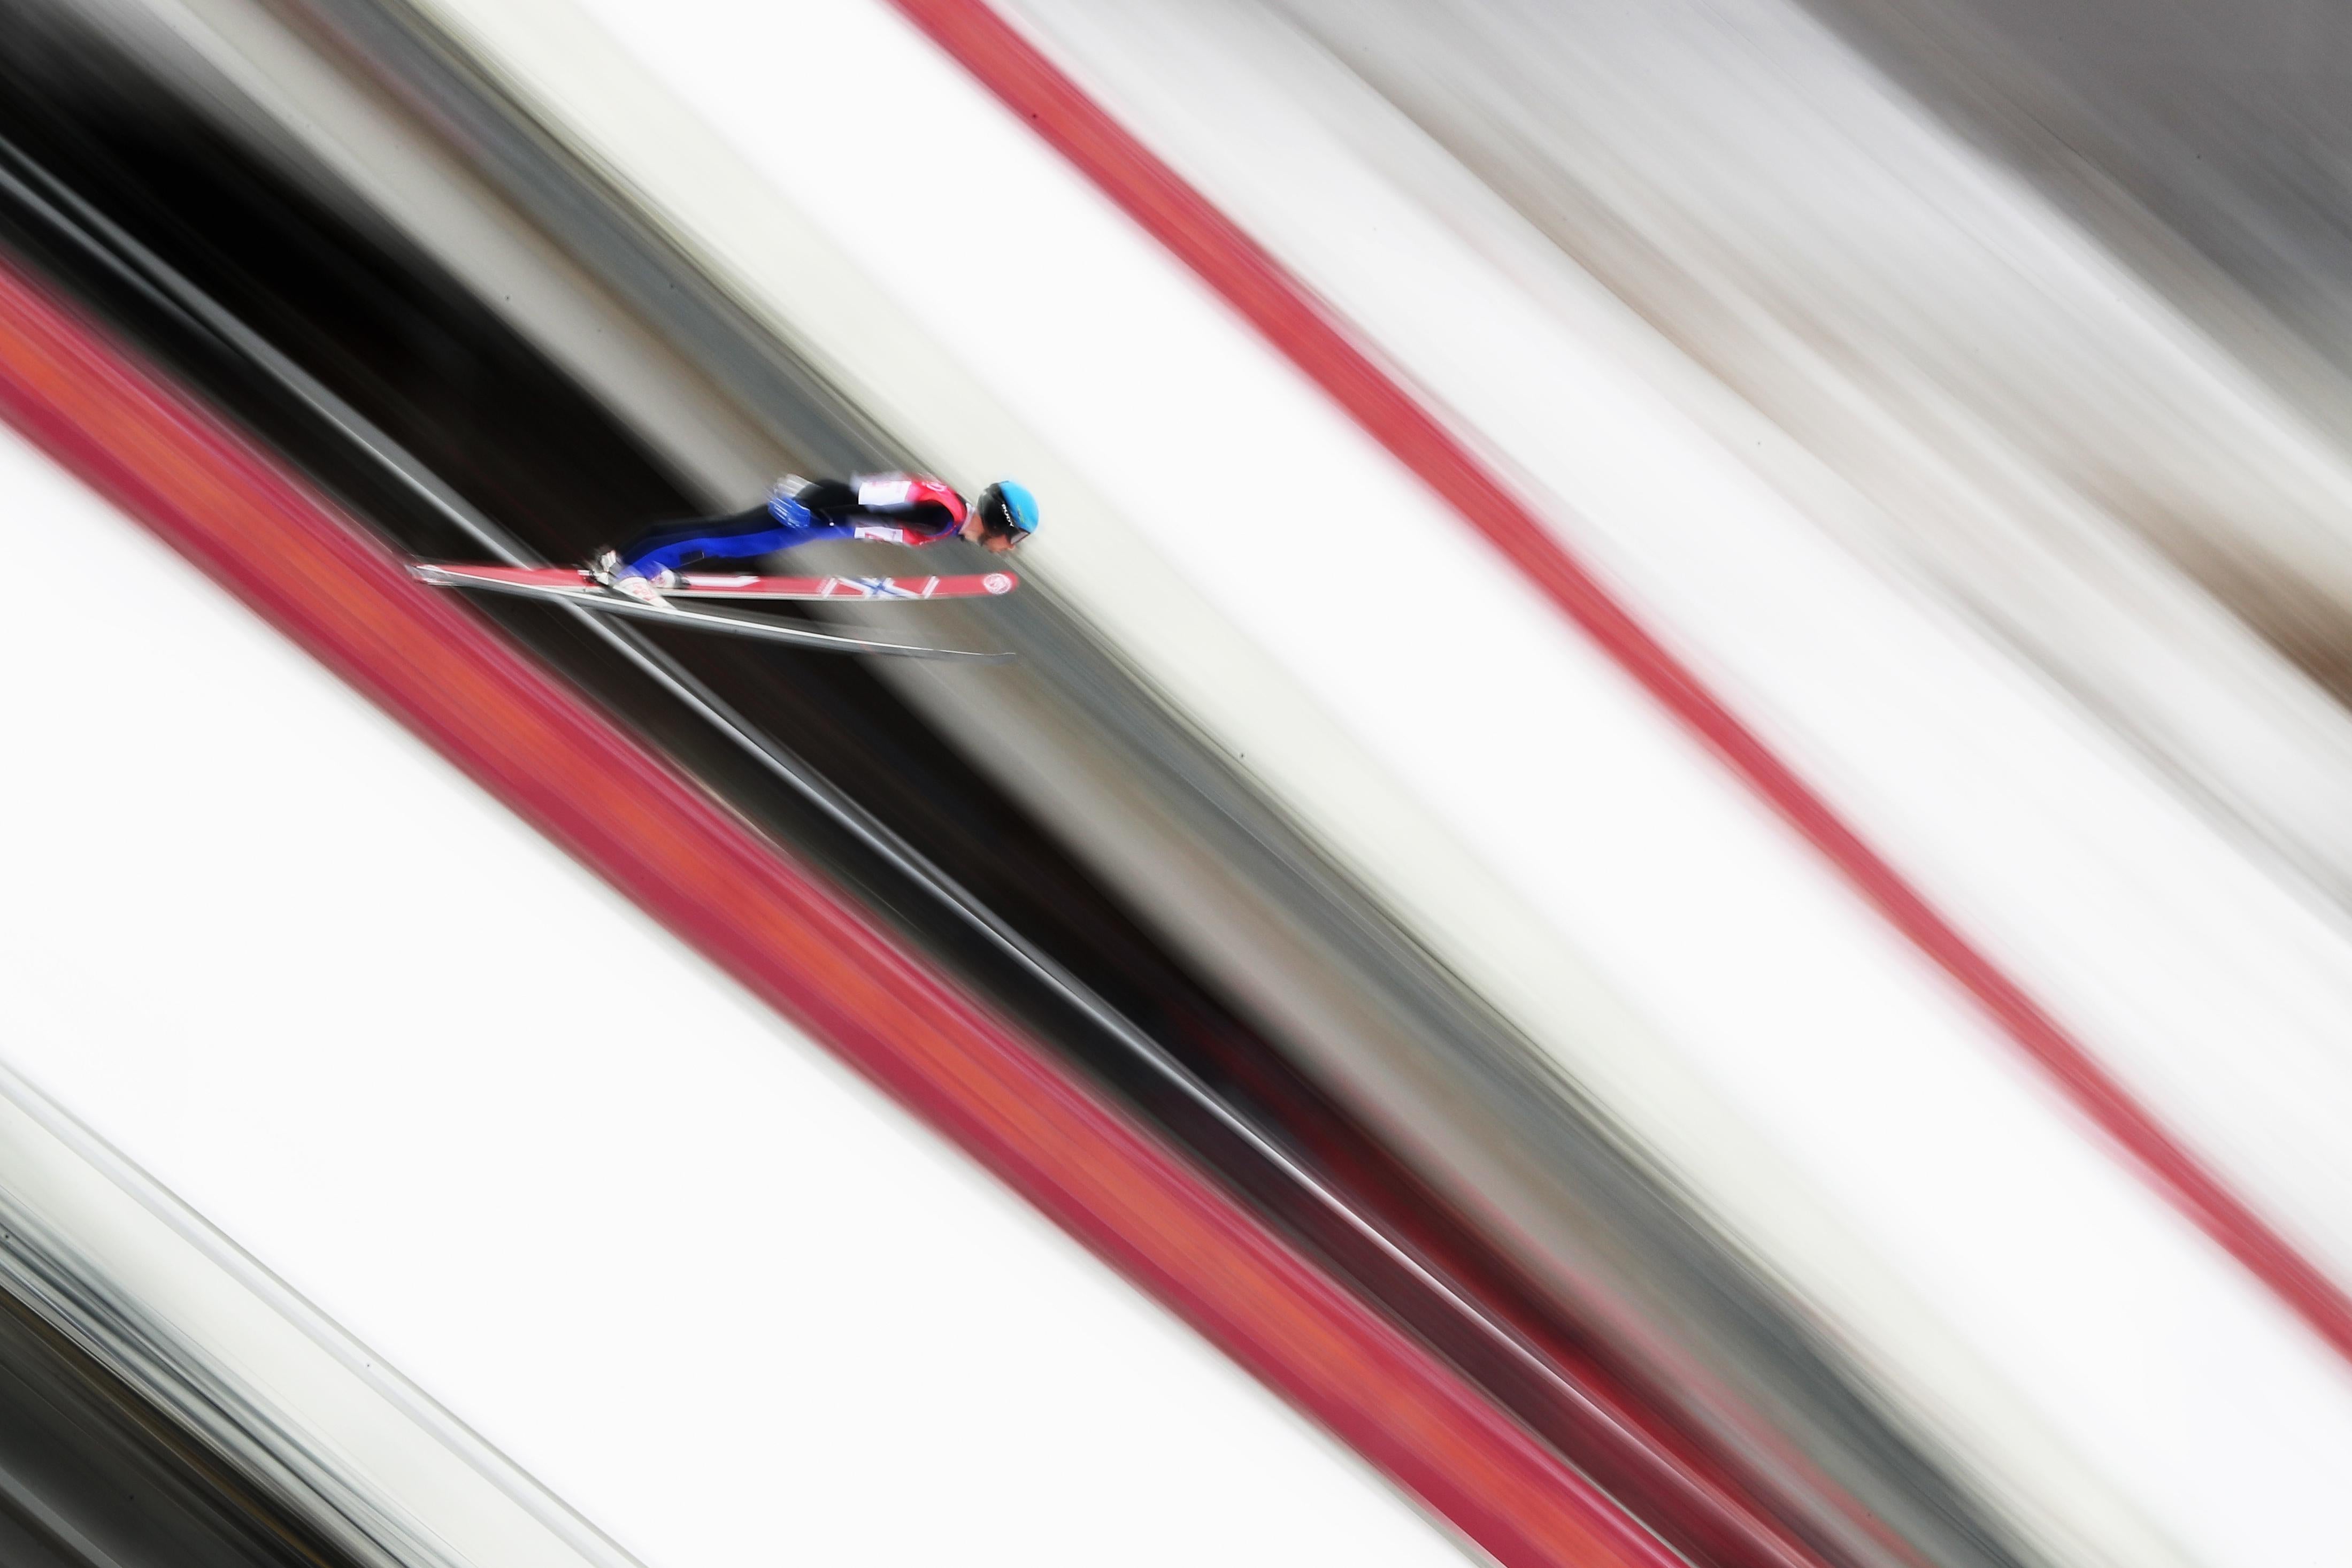 PYEONGCHANG-GUN, SOUTH KOREA - FEBRUARY 14:  Jan Schmid of Norway makes a trial jump during the Nordic Combined Individual Gundersen Normal Hill and 10km Cross Country on day five of the PyeongChang 2018 Winter Olympics at Alpensia Ski Jumping Centre on February 14, 2018 in Pyeongchang-gun, South Korea.  (Photo by Al Bello/Getty Images)